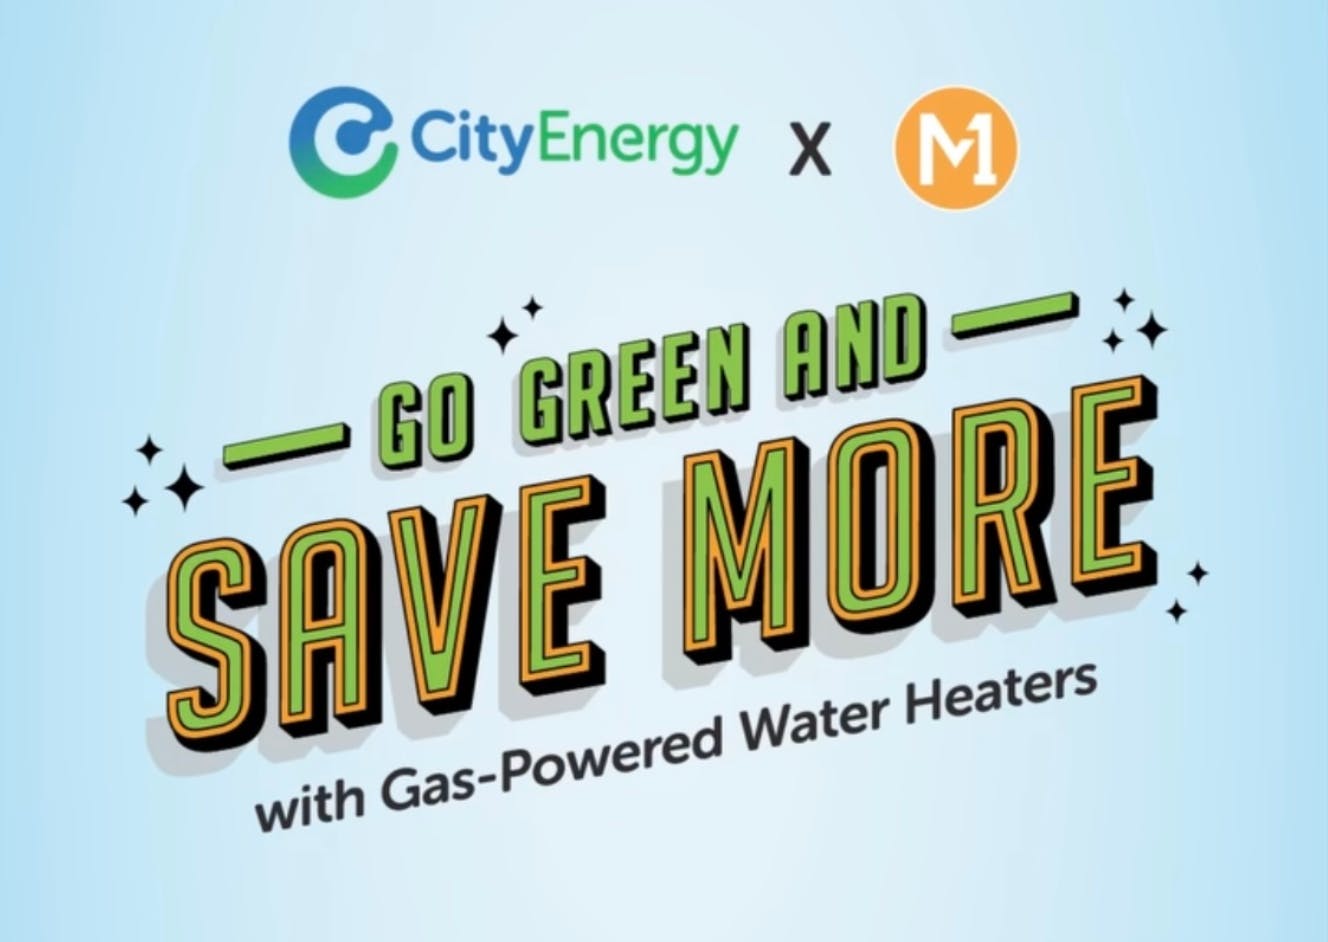 An advertising for City Energy in Singapore, promoting natural gas-powered water heaters as "greener"